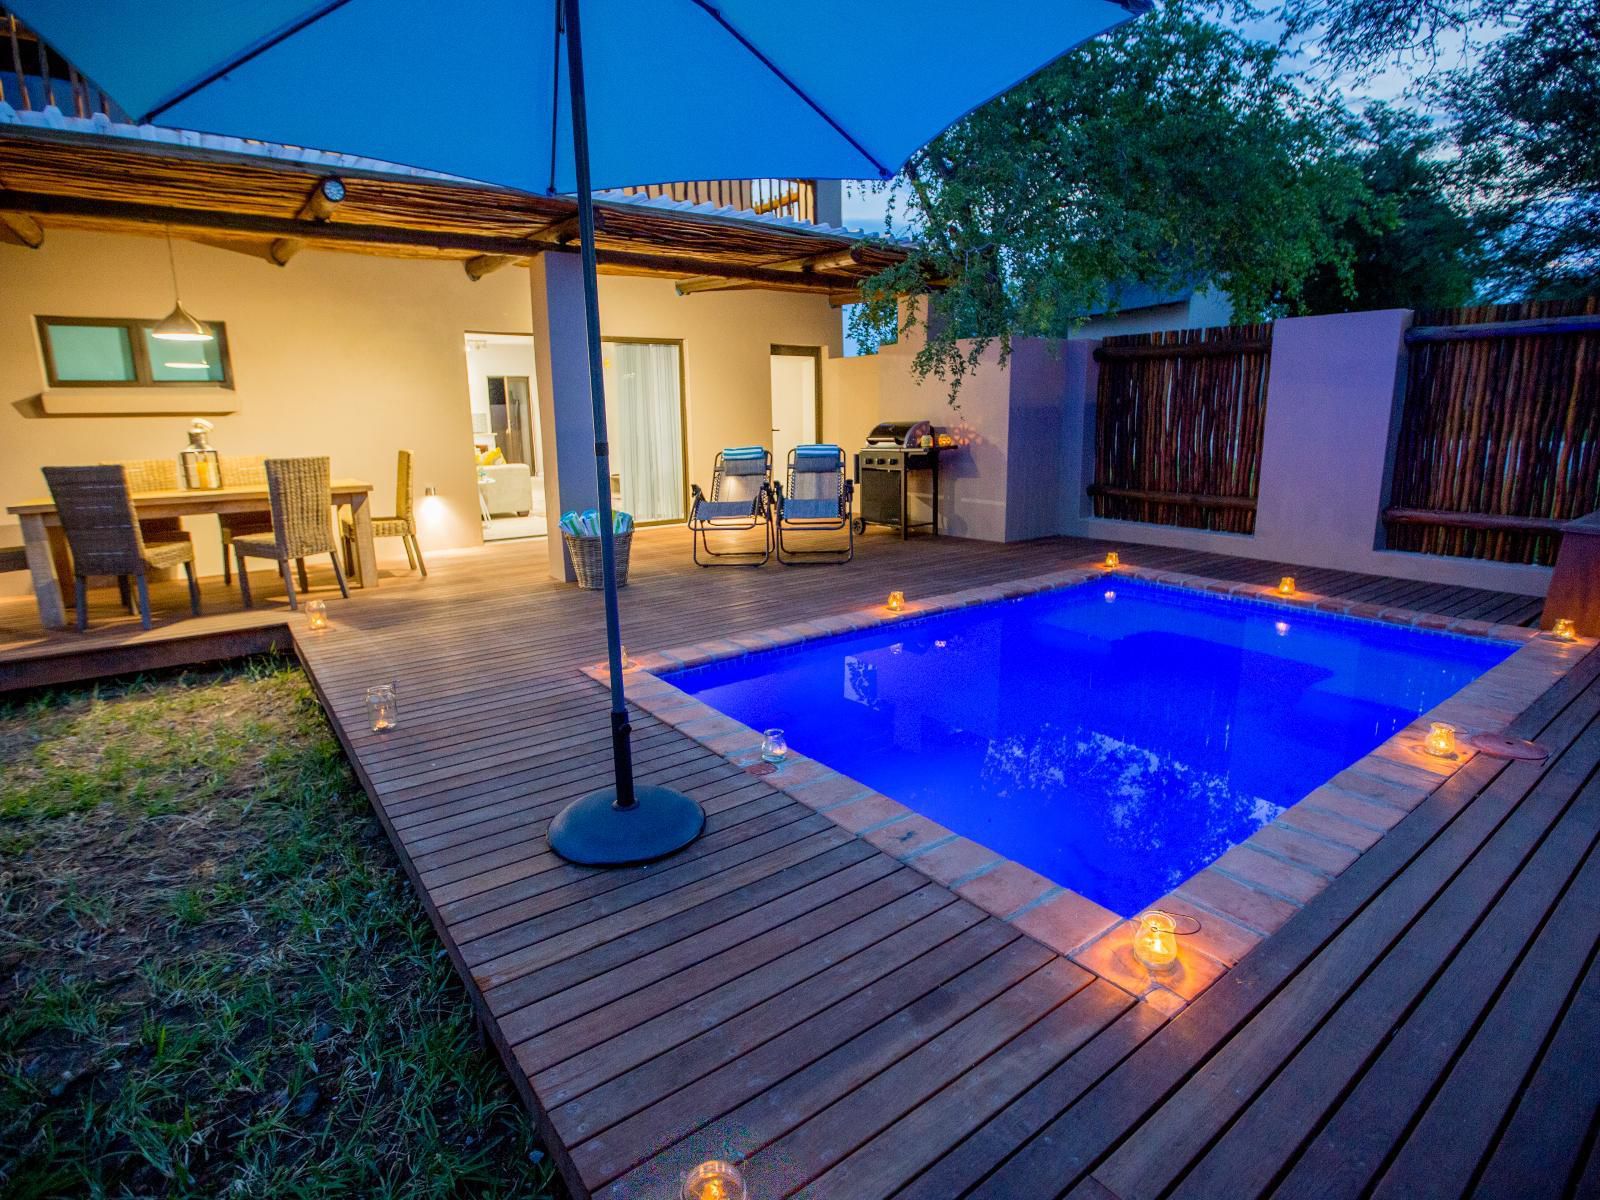 Maya Manor Hoedspruit Limpopo Province South Africa Complementary Colors, House, Building, Architecture, Swimming Pool